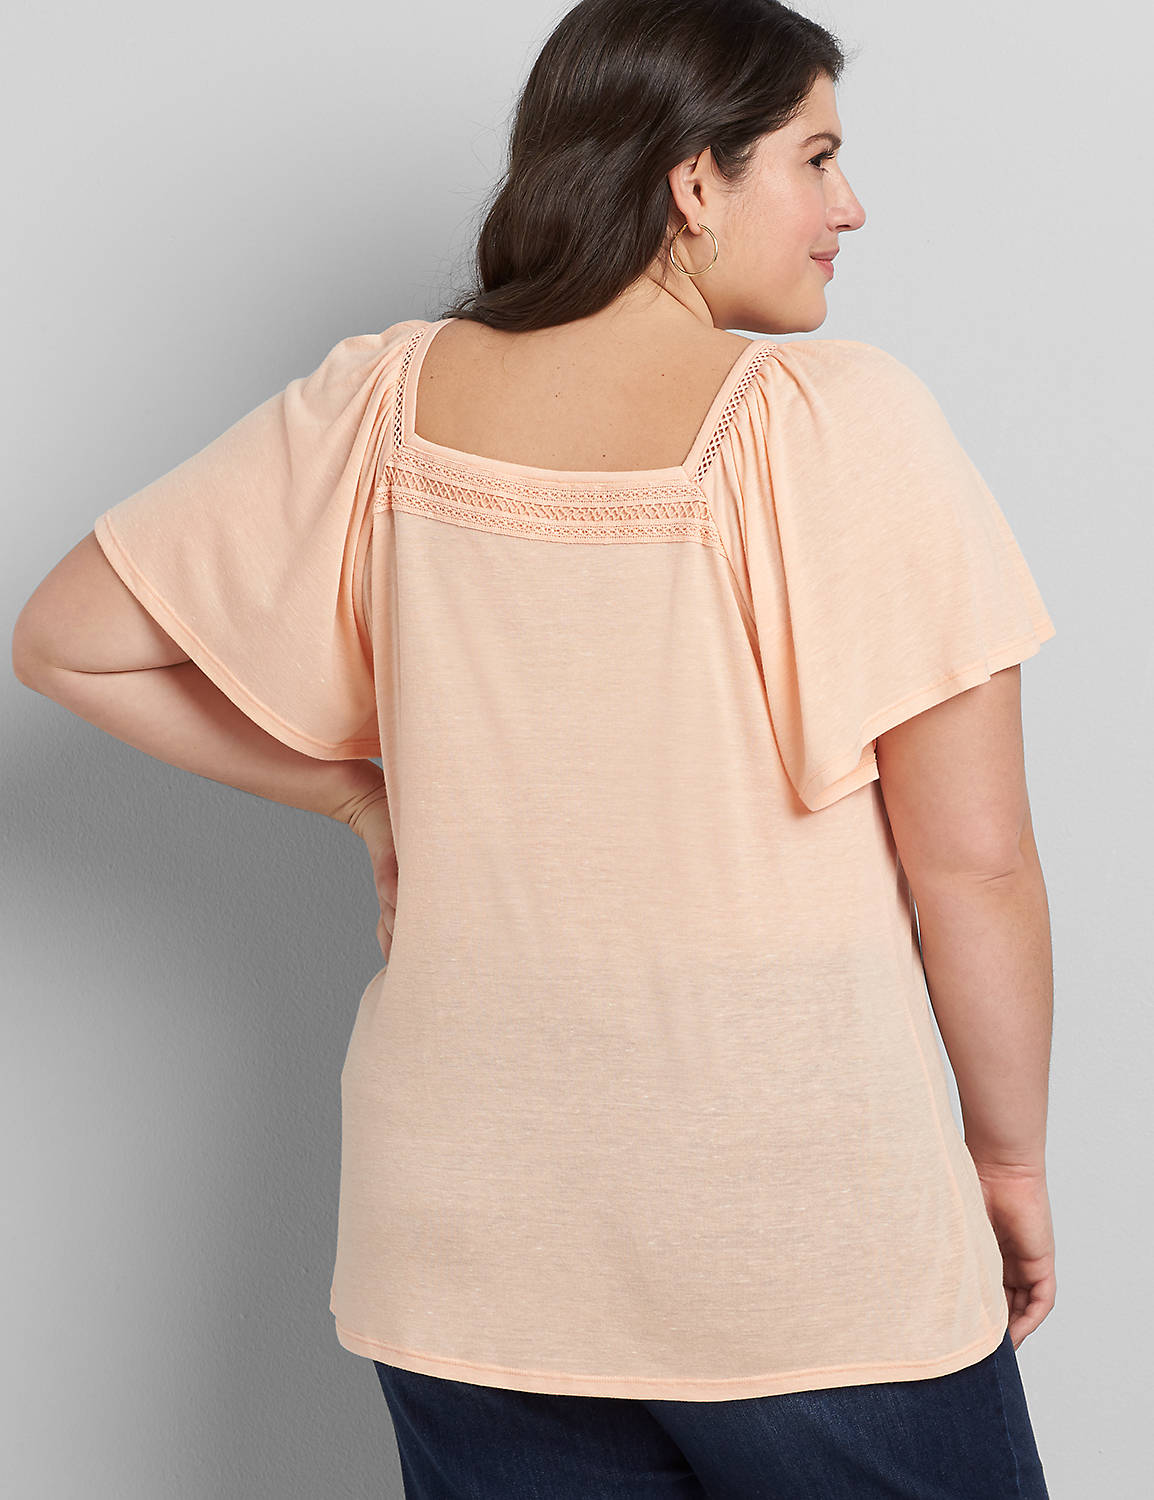 Short Sleeve Elastic Square Neck Top With Buttons 1119620:Sunset Pink Pearl 40-0005-11:18/20 Product Image 2